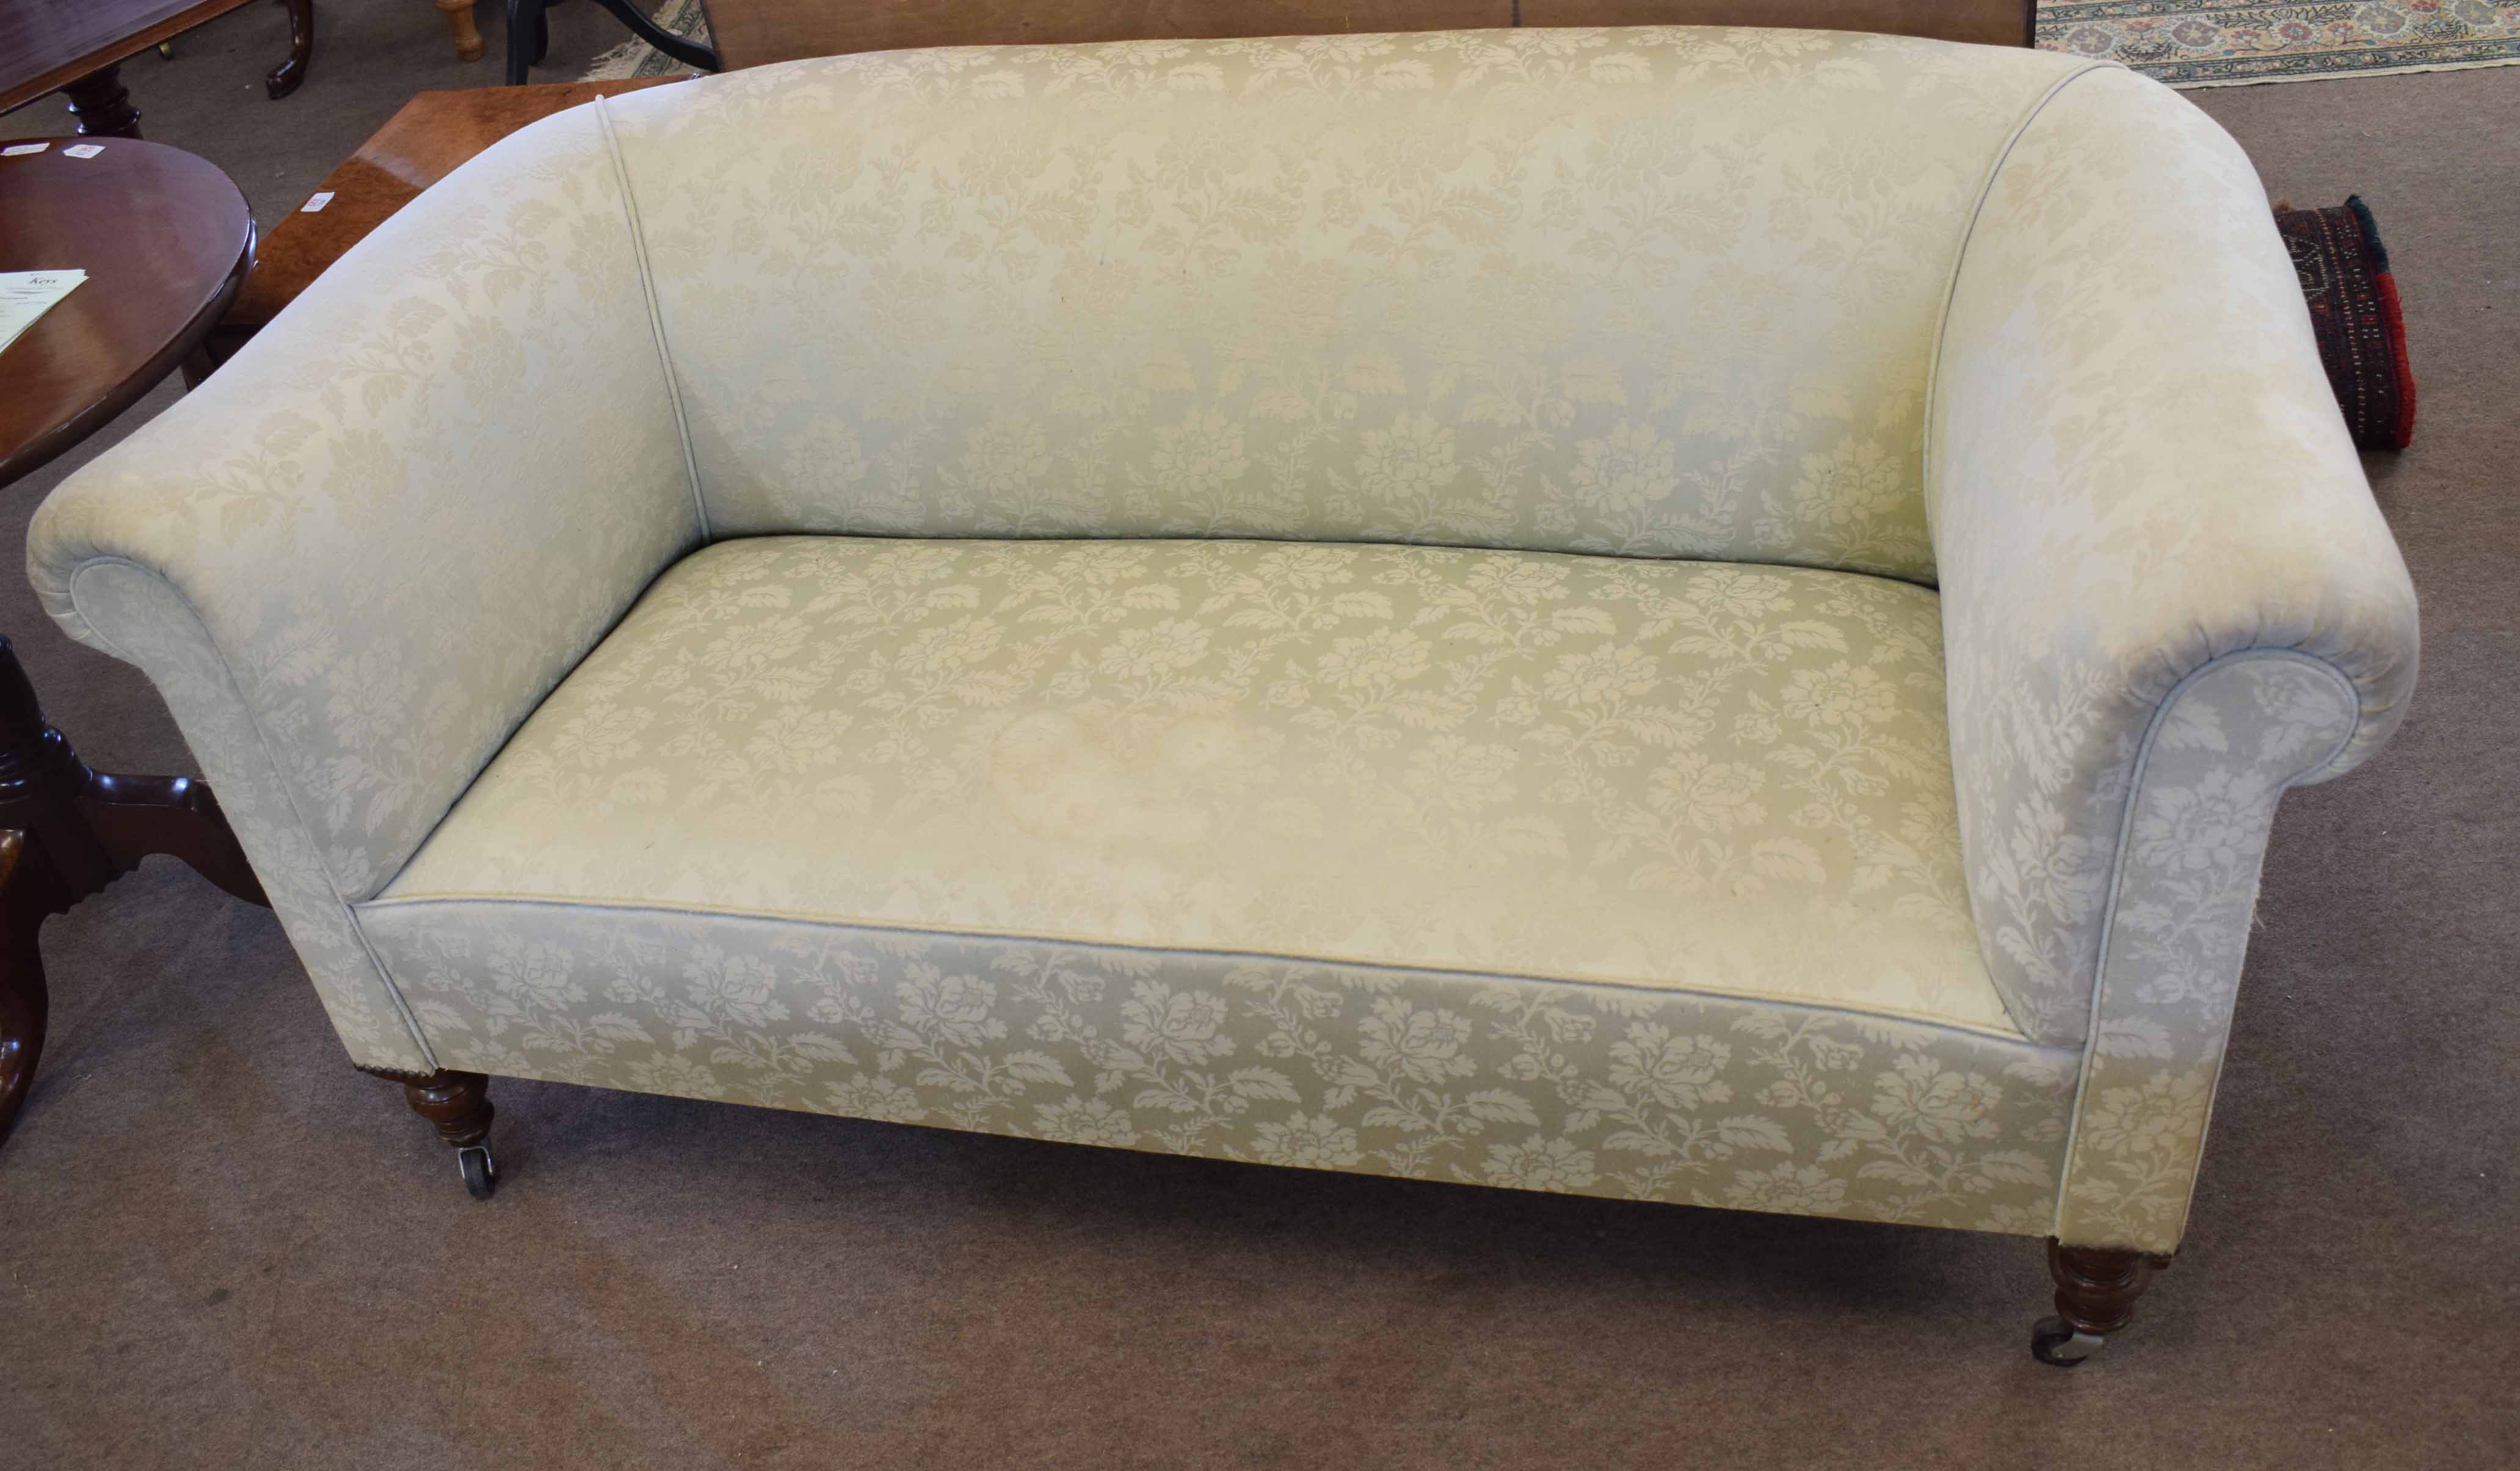 Small 20th century Chesterfield sofa upholstered in light green damask material, 140cm wide x 70cm